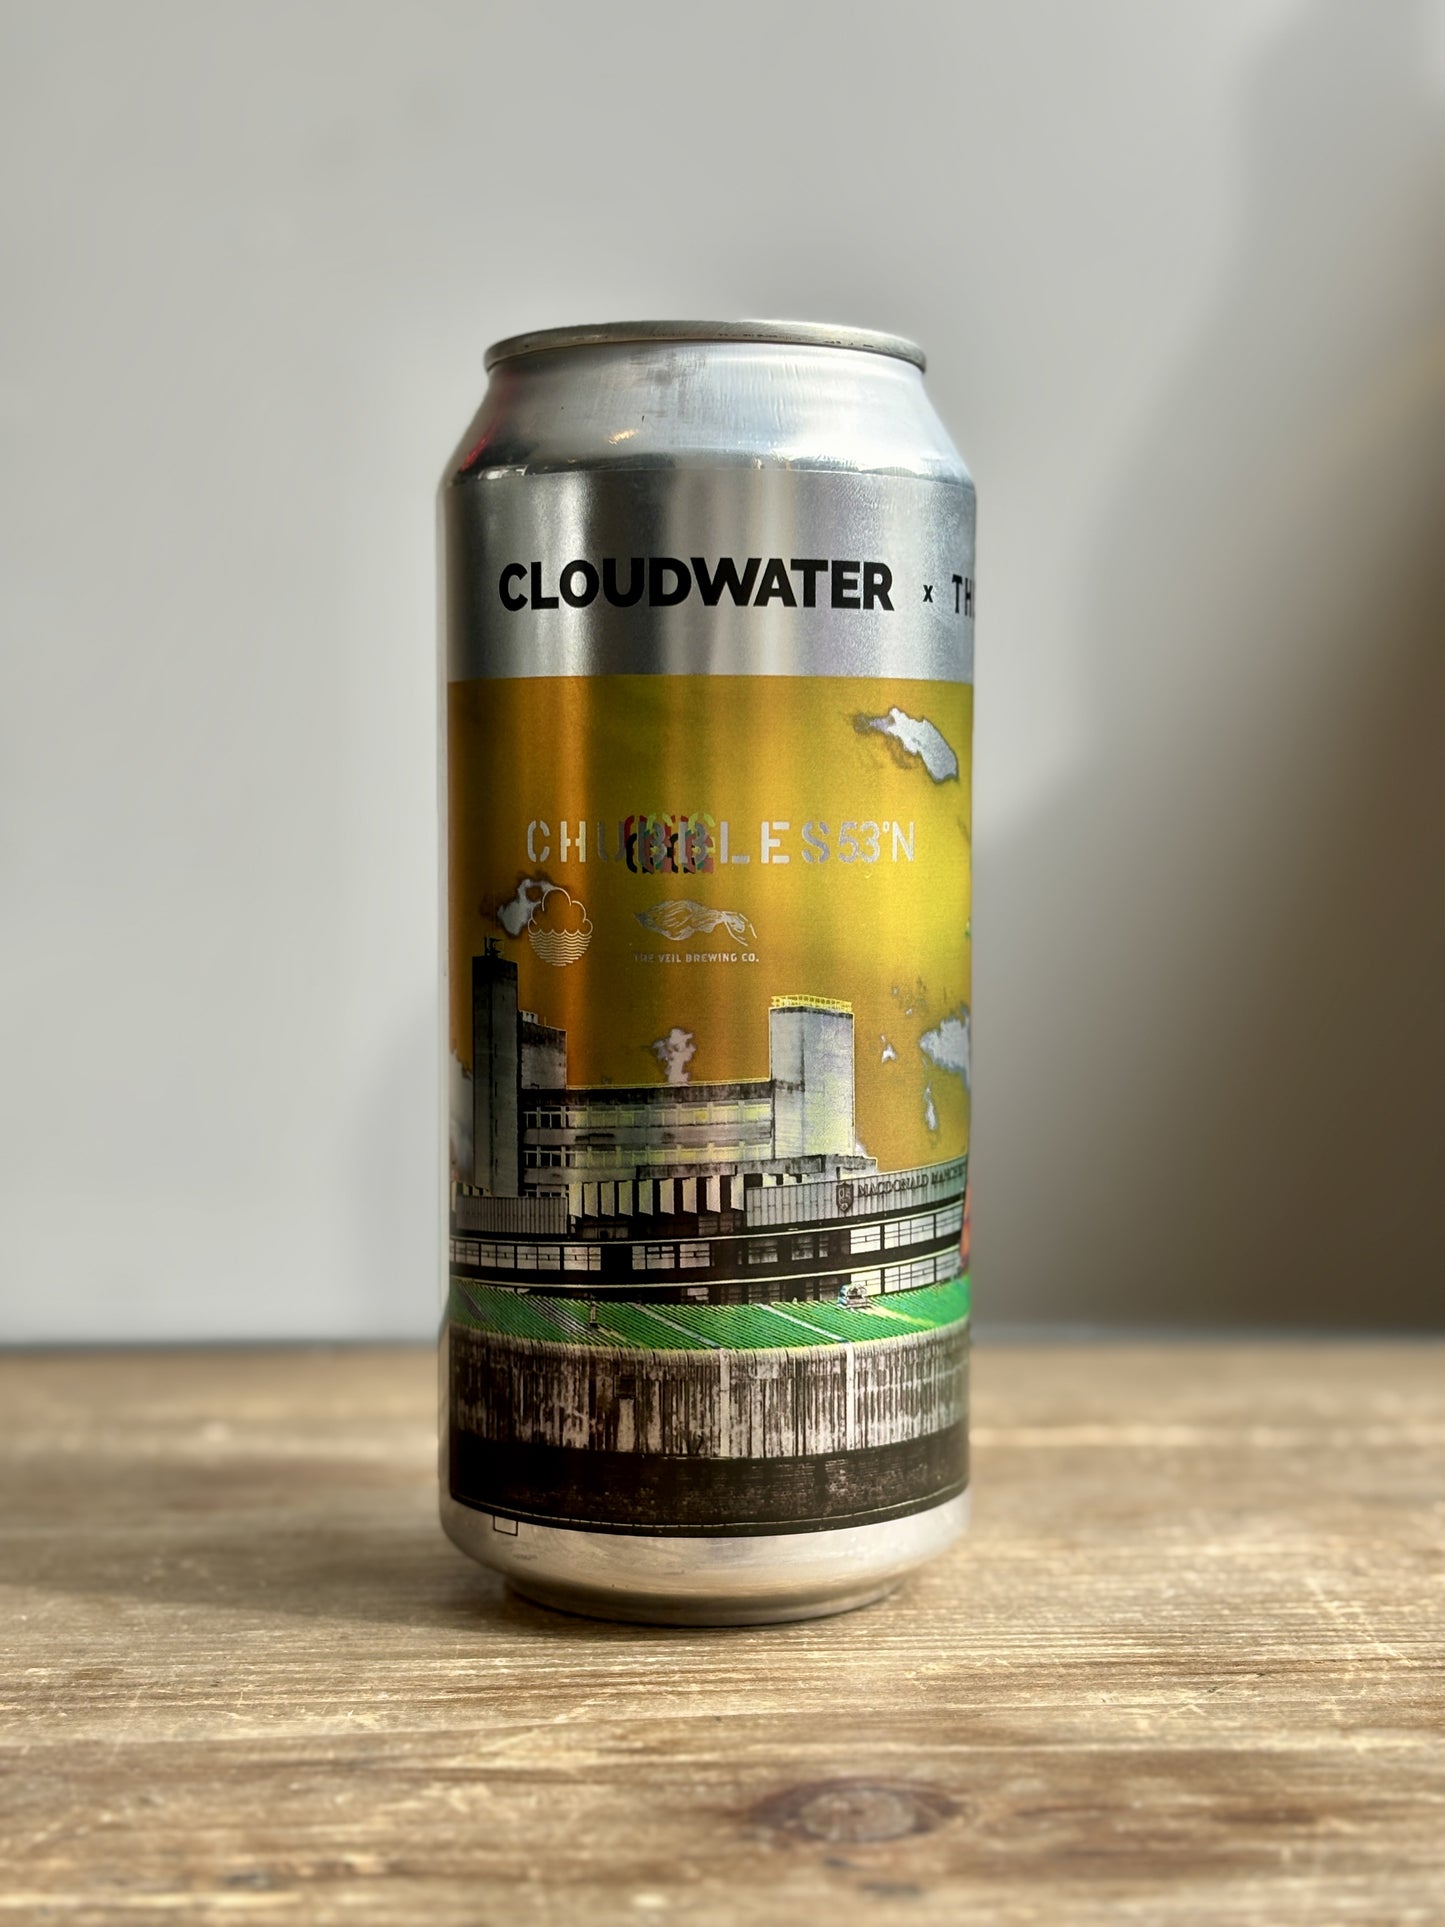 Cloudwater Chubbles 53 North